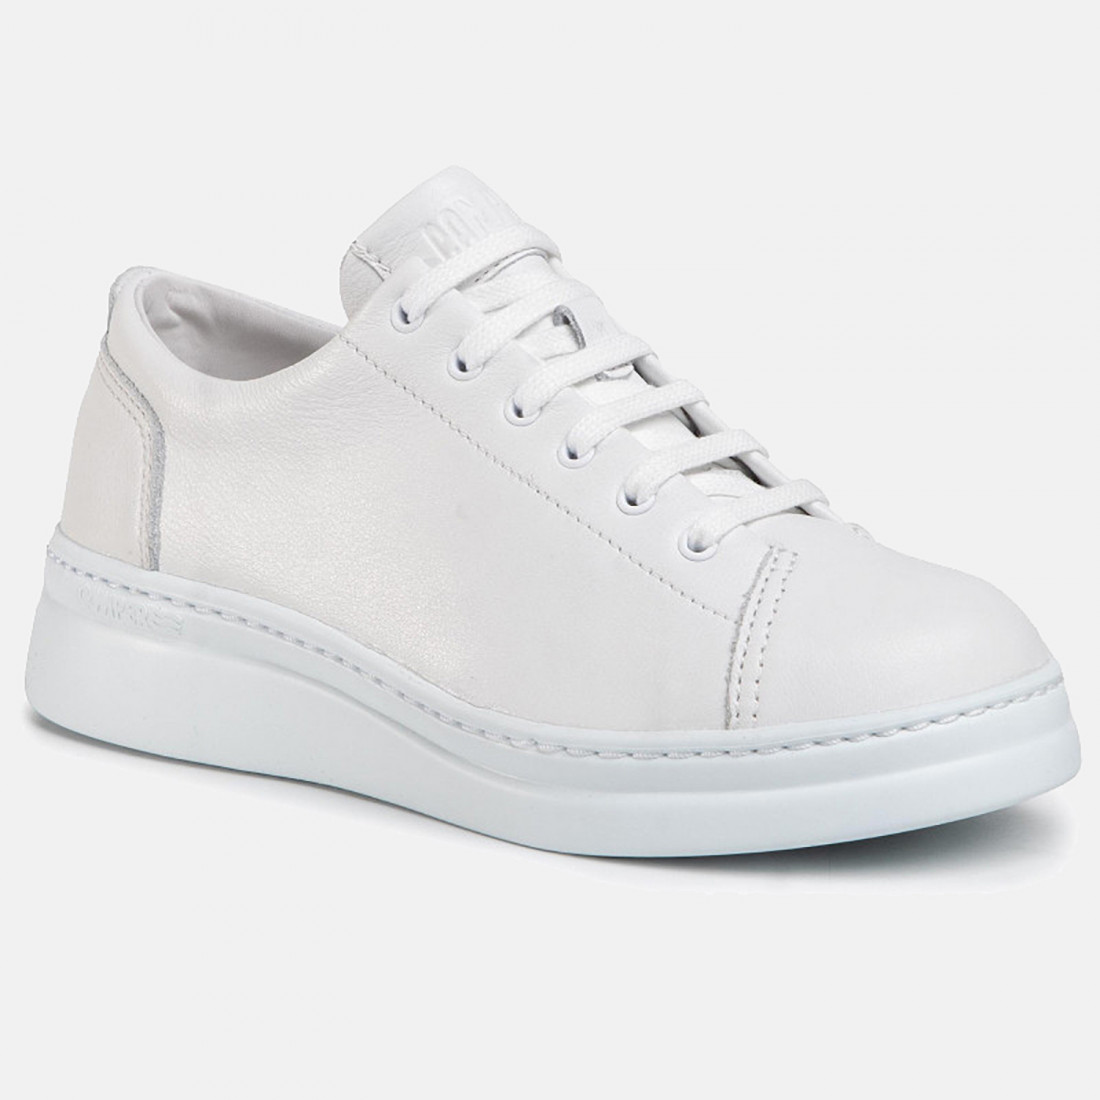 Camper Up for women in White leather